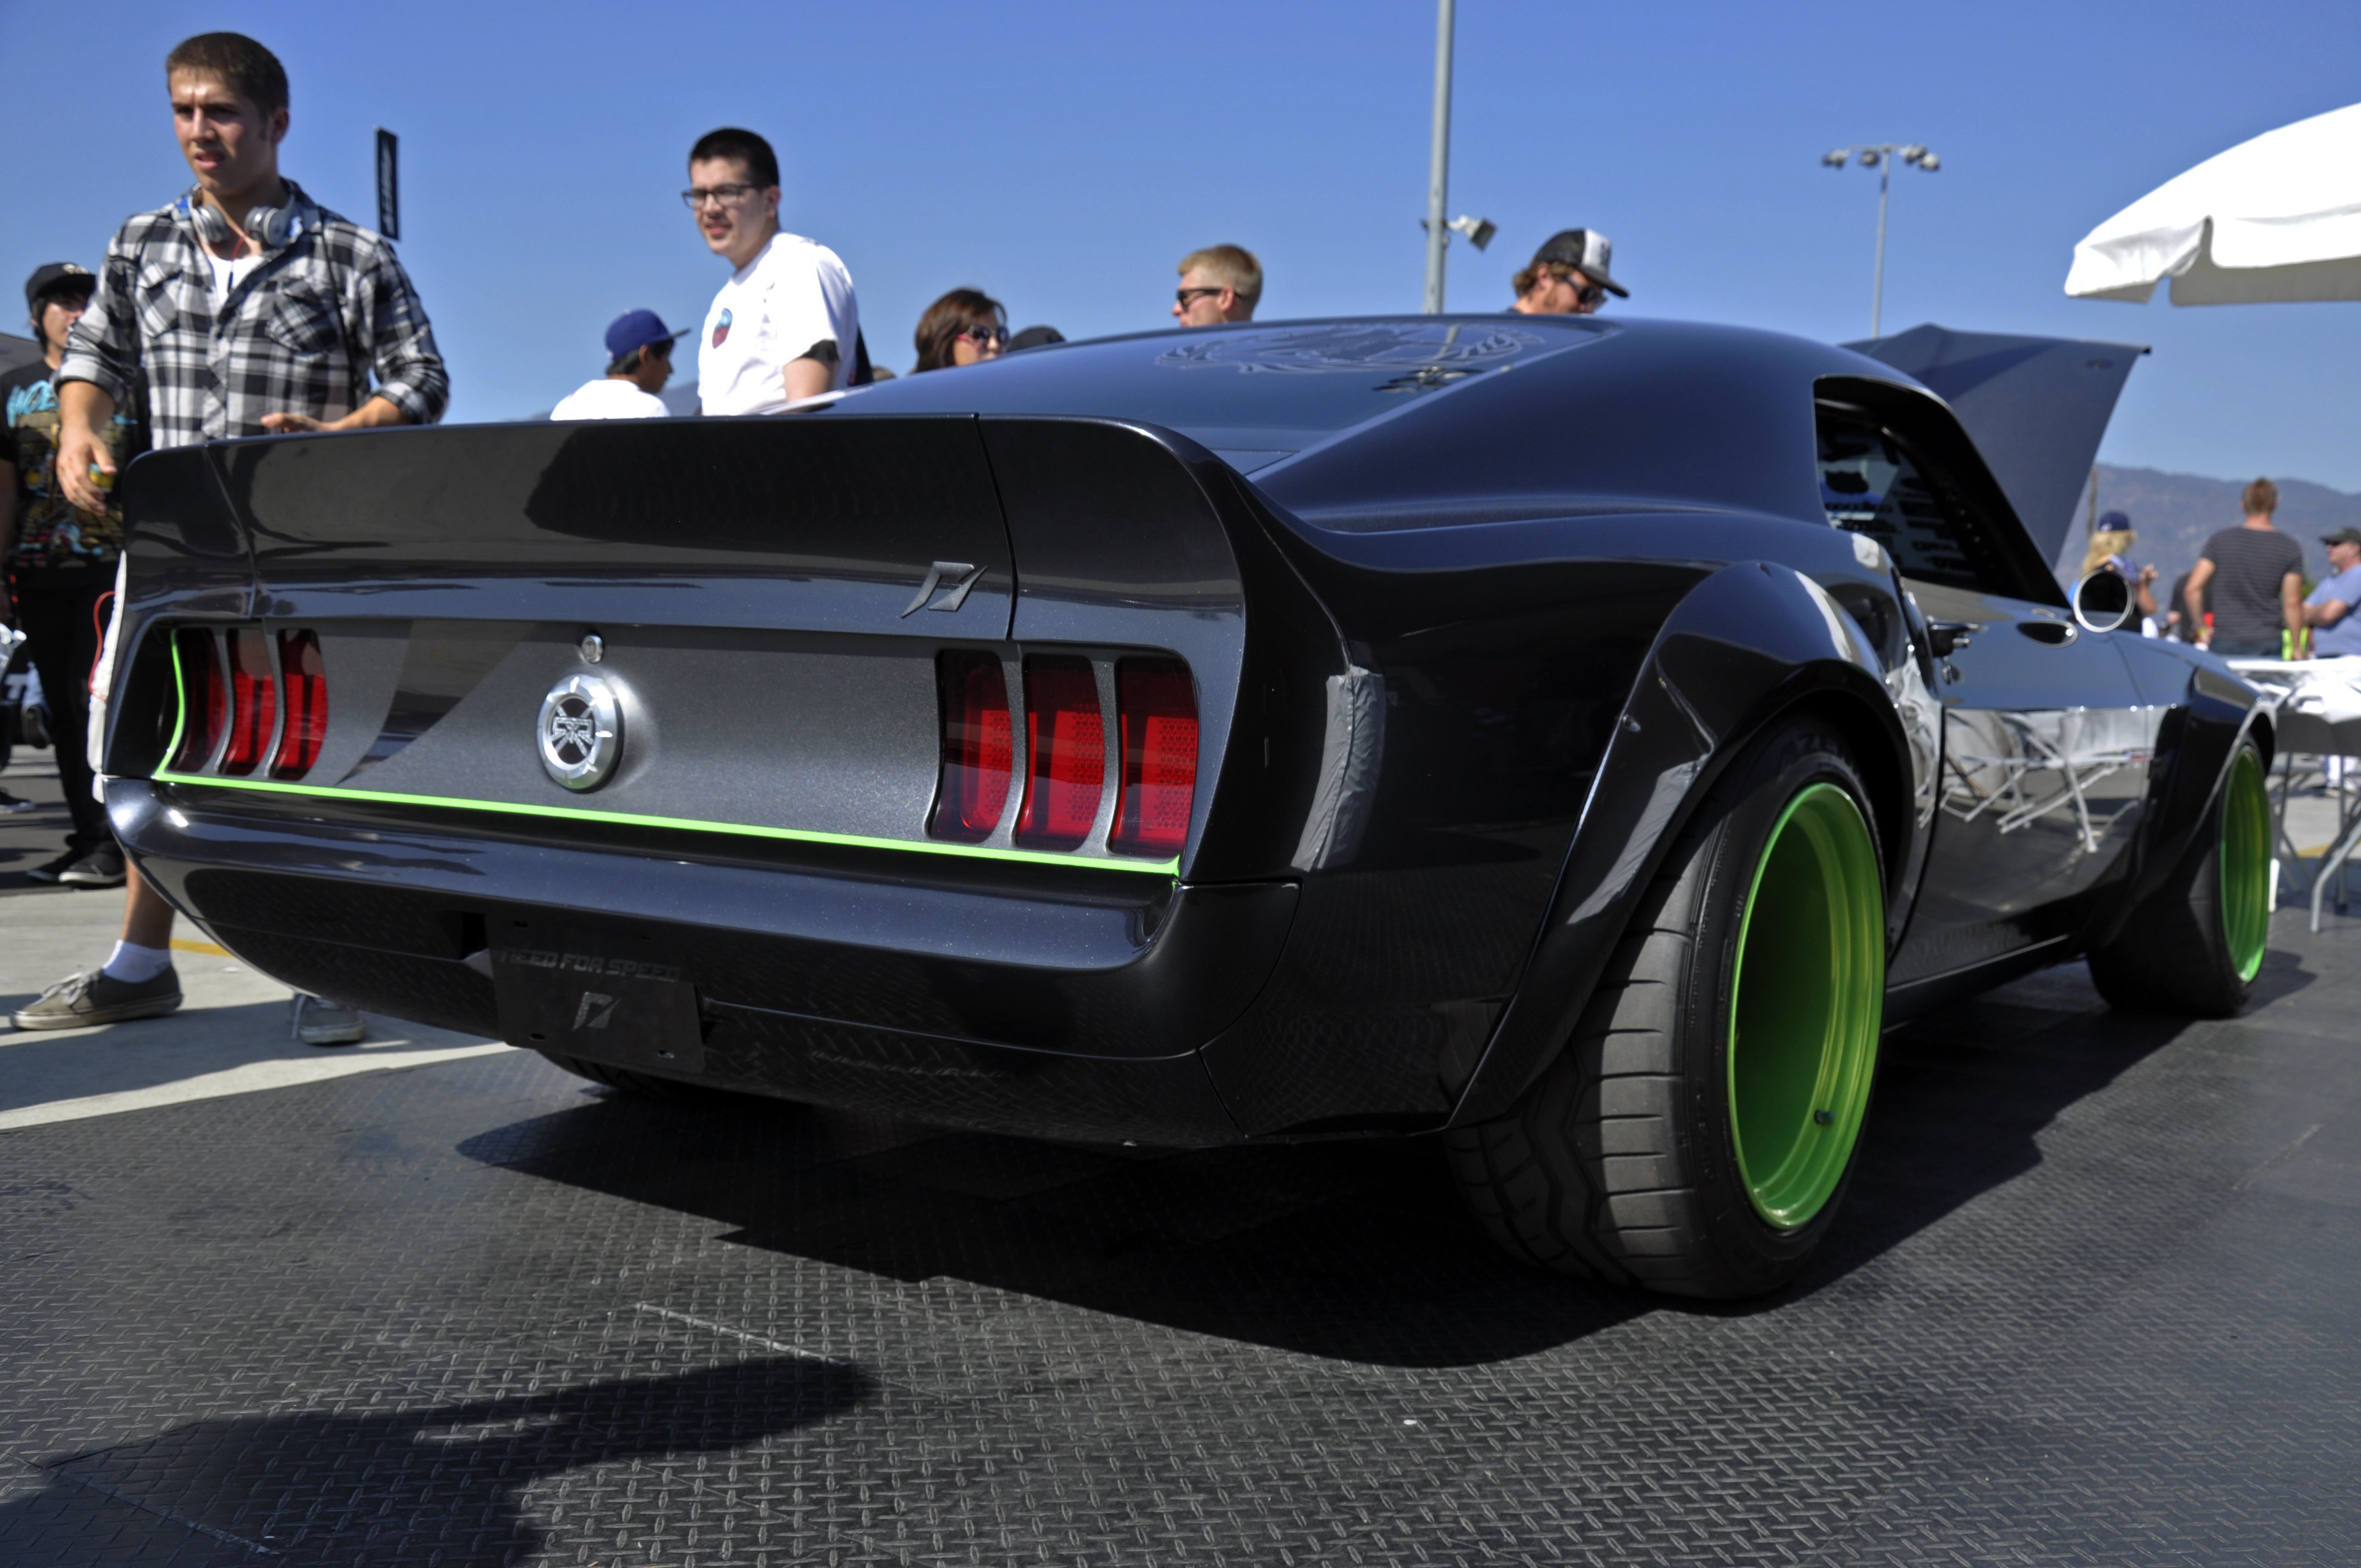 Ford mustang hot rod classic muscle cars racing drift tuning race track  wallpaper, 1920x1200, 28124